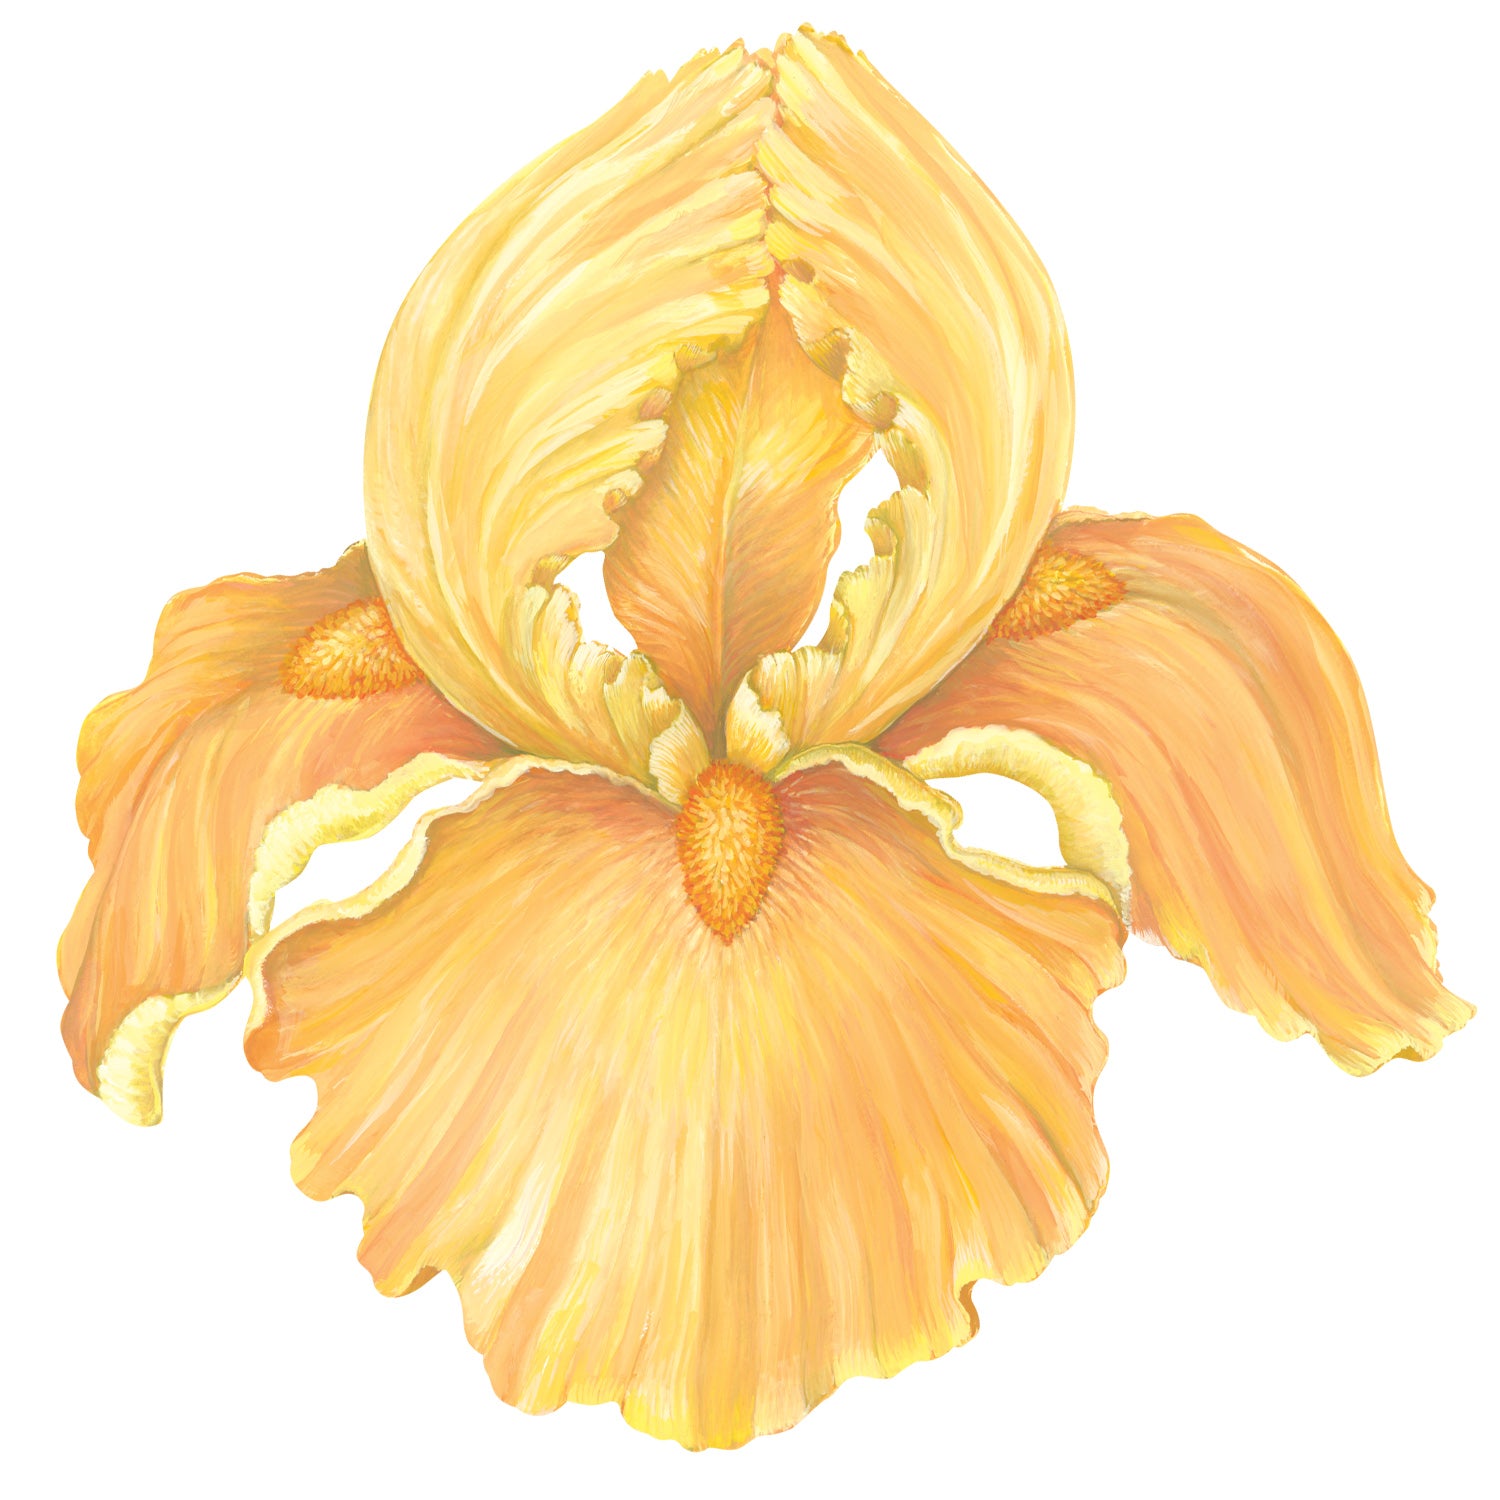 A die-cut illustrated iris bloom, in bright yellow.